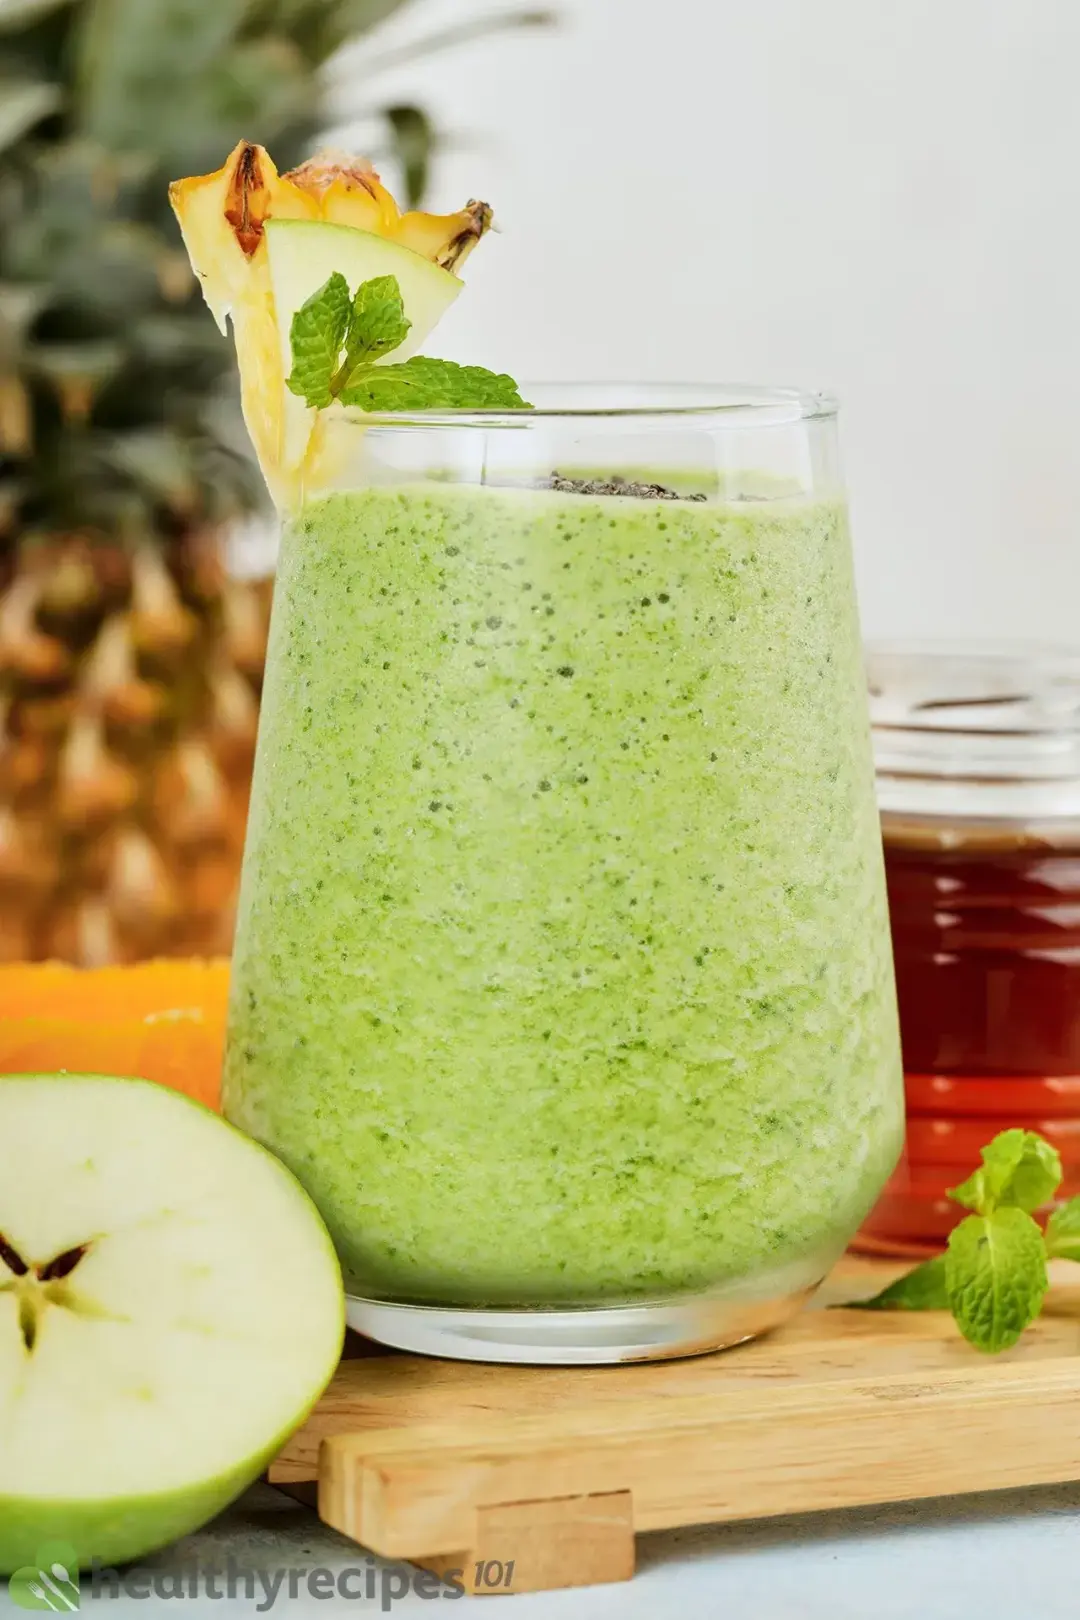 A glass of green apple smoothie surrounded by half a green apple and a small jar of honey